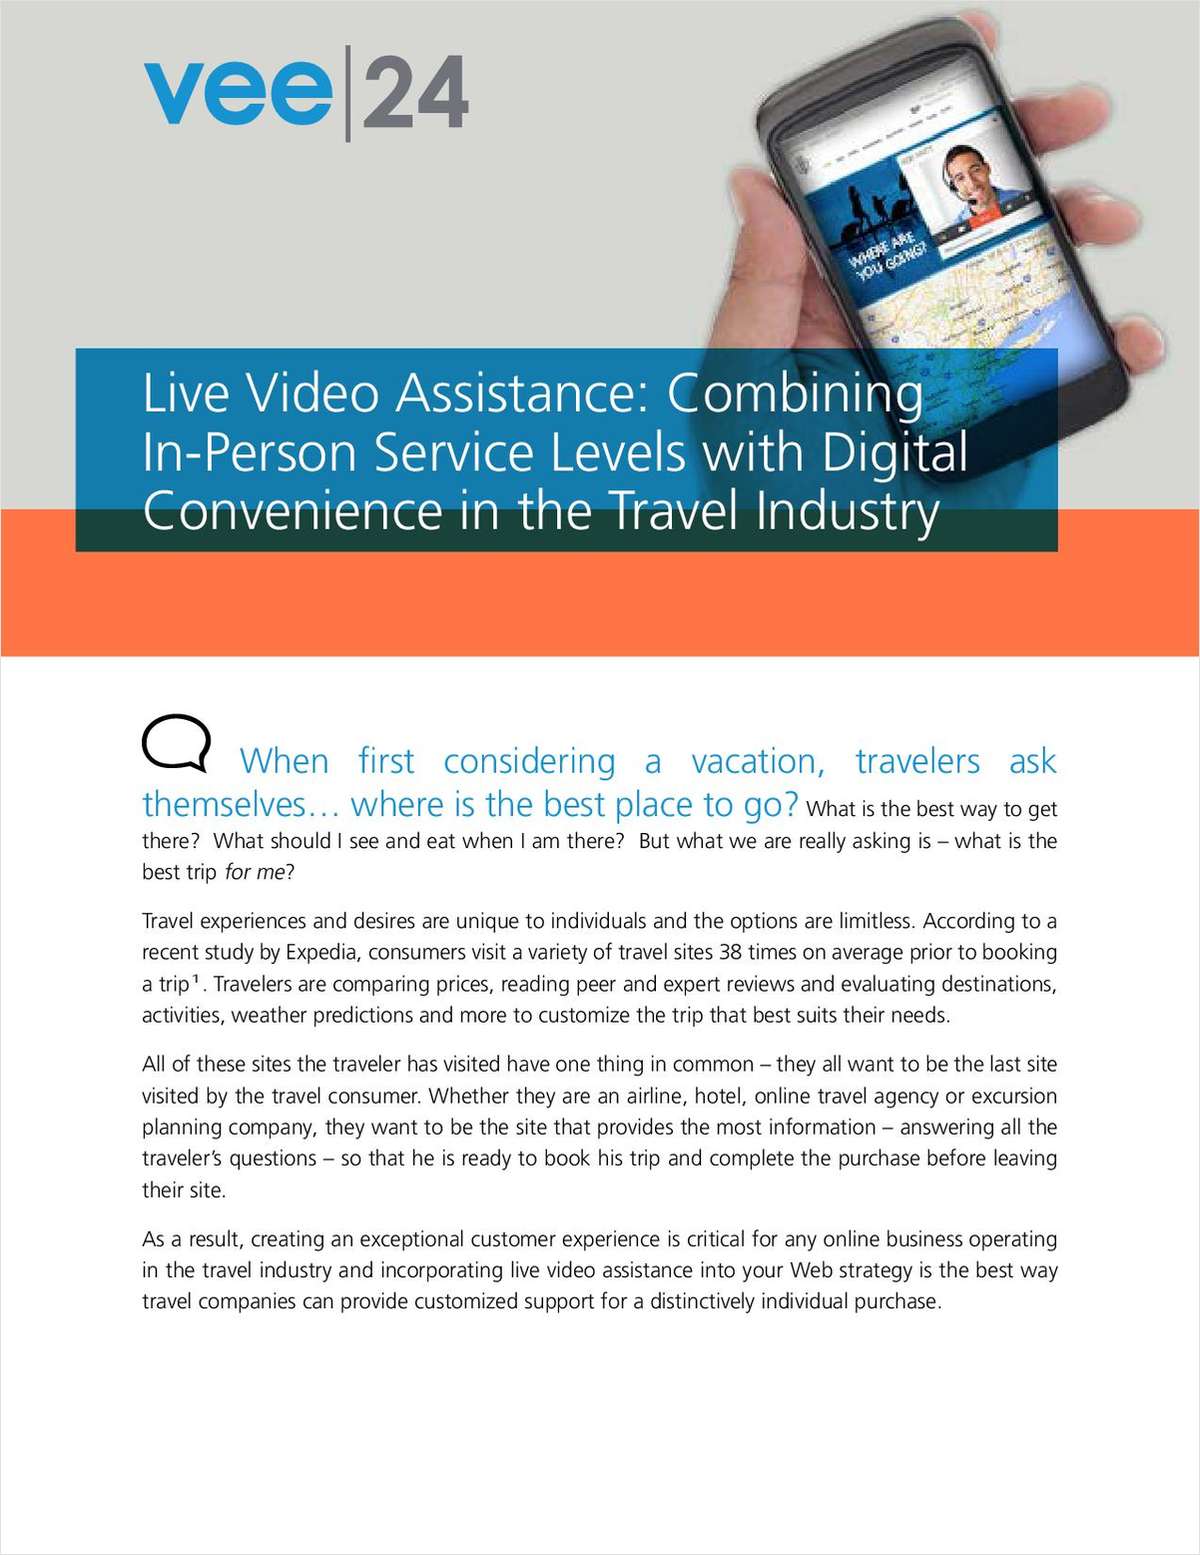 Live Video Assistance: Combining In-Person Service Levels with Digital Convenience in the Travel Industry